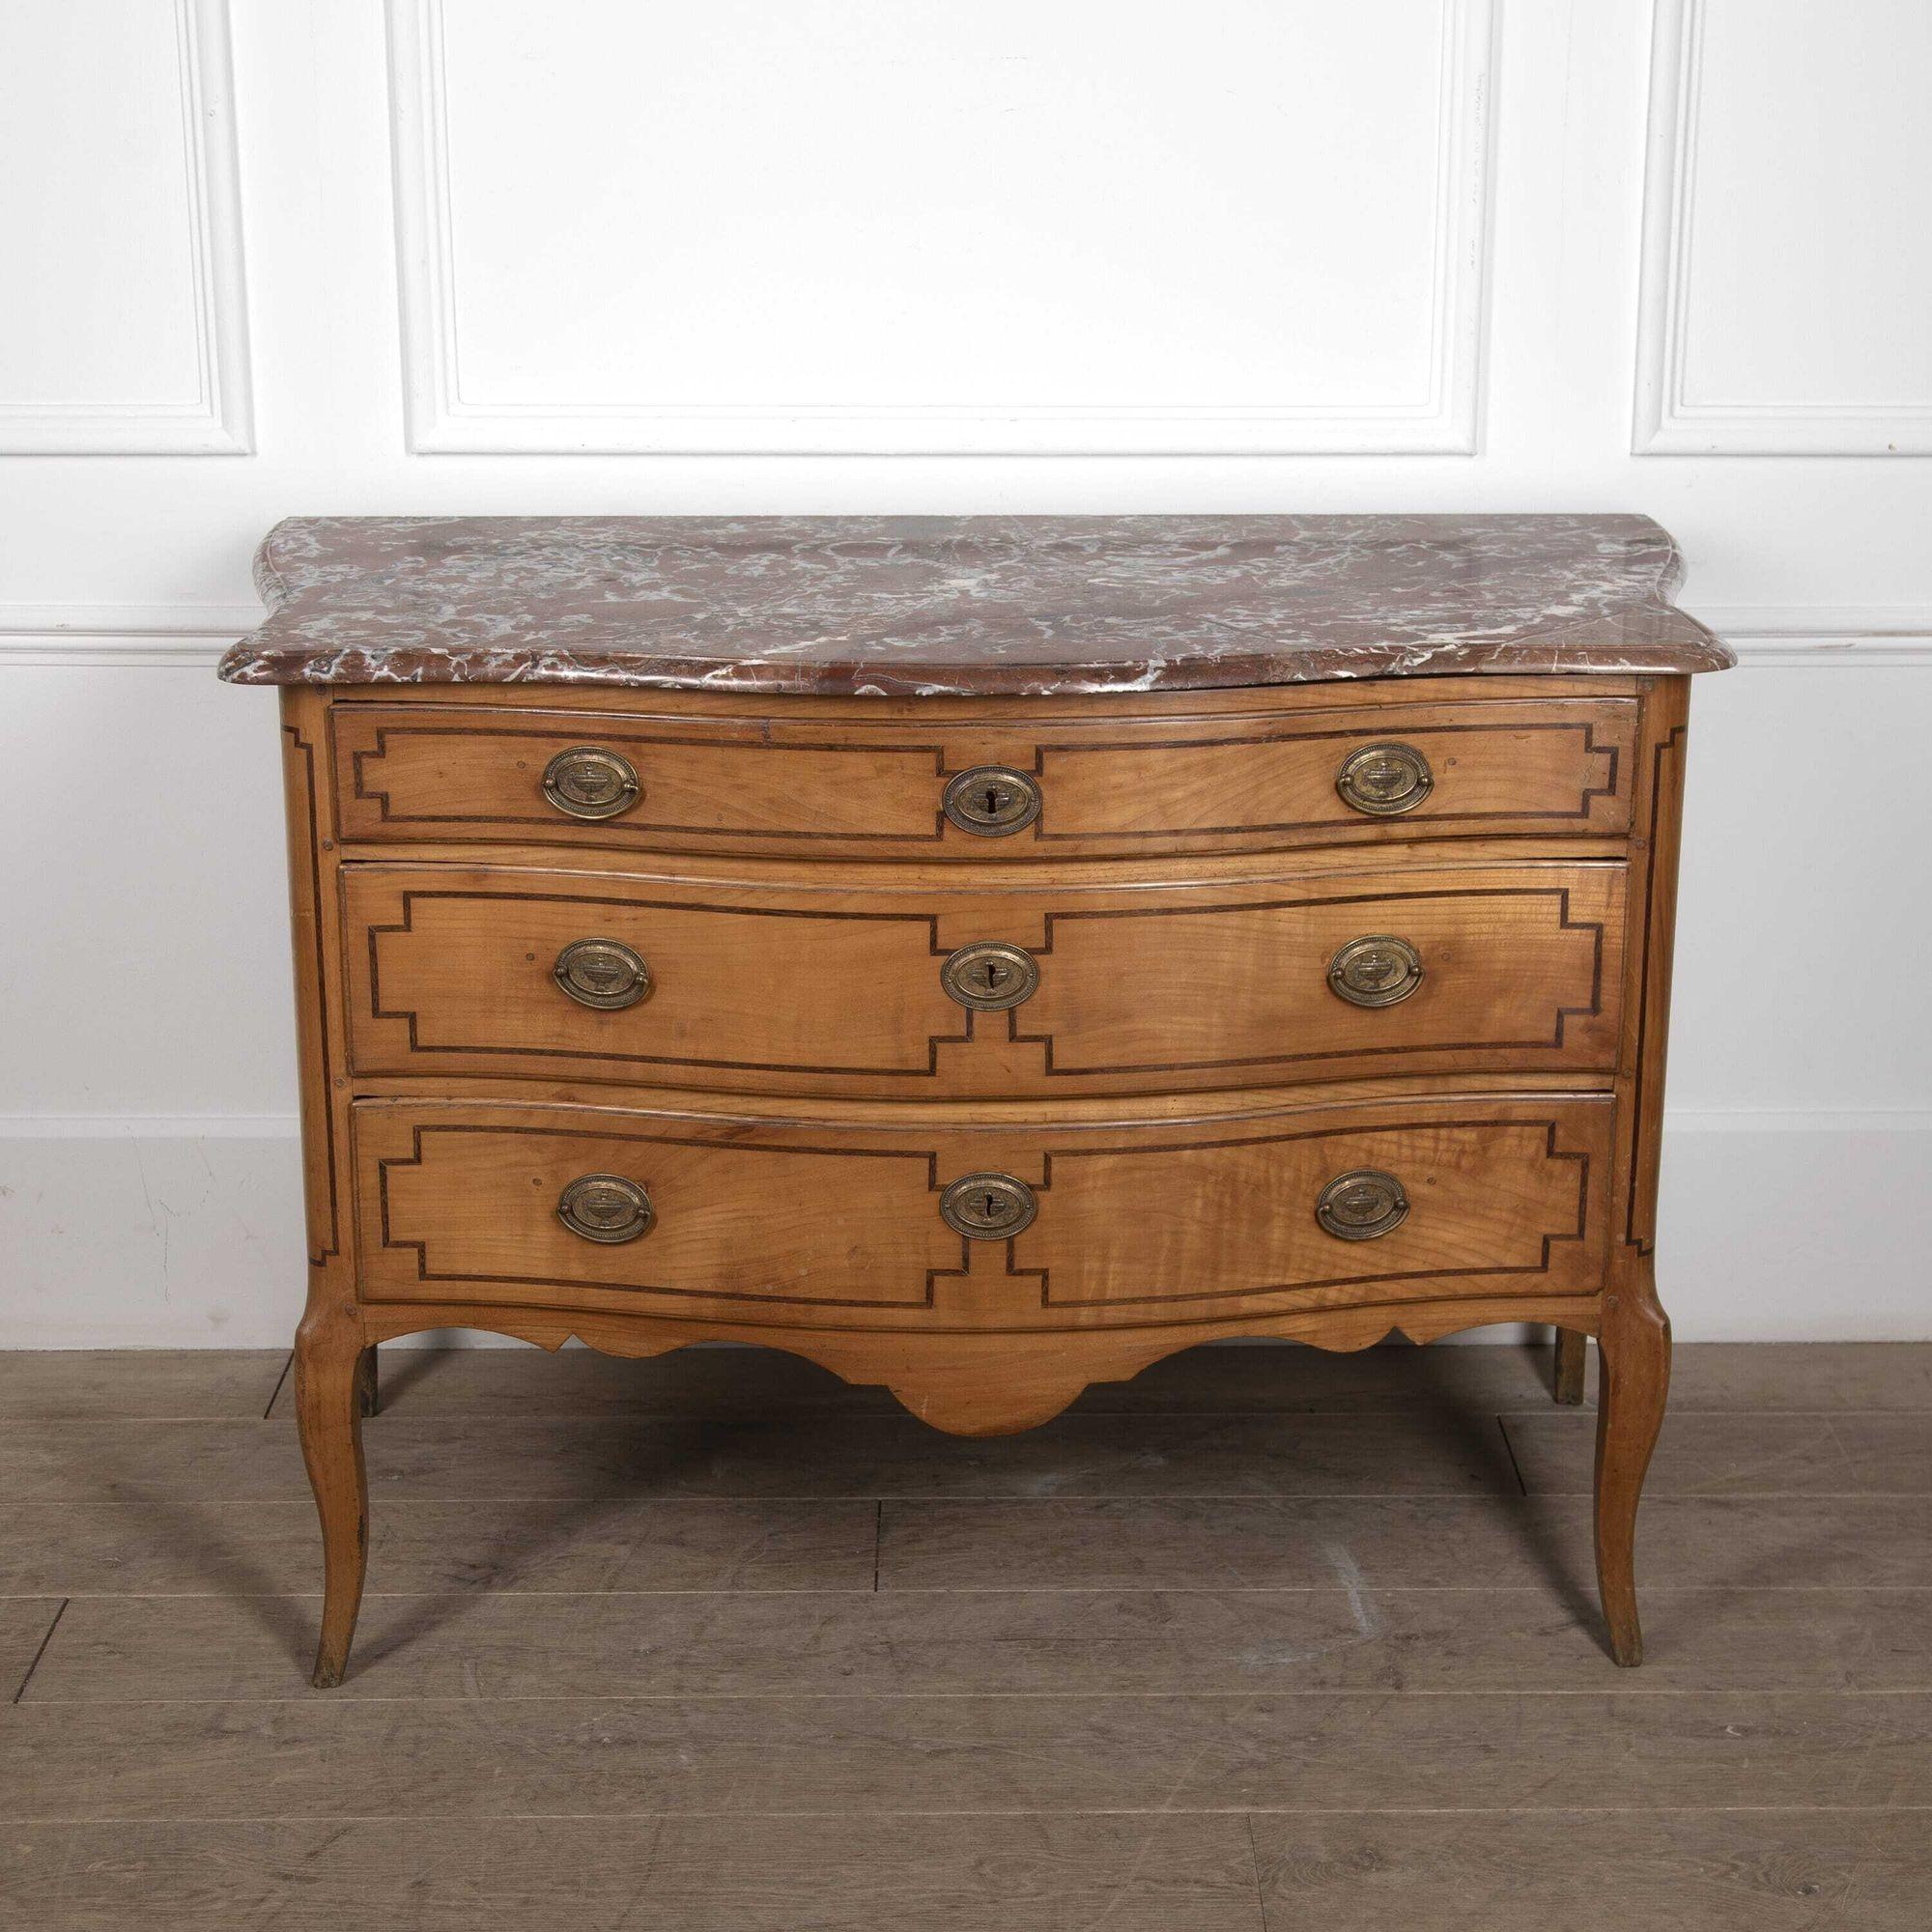 Louis XV/XVI transitional period commode is satinwood and serpentine in form standing on elegant cabriole legs.
The front and sides of the commode are inlaid with bold rosewood banding with re-entrant corners.
The later Sheriton style hardware is